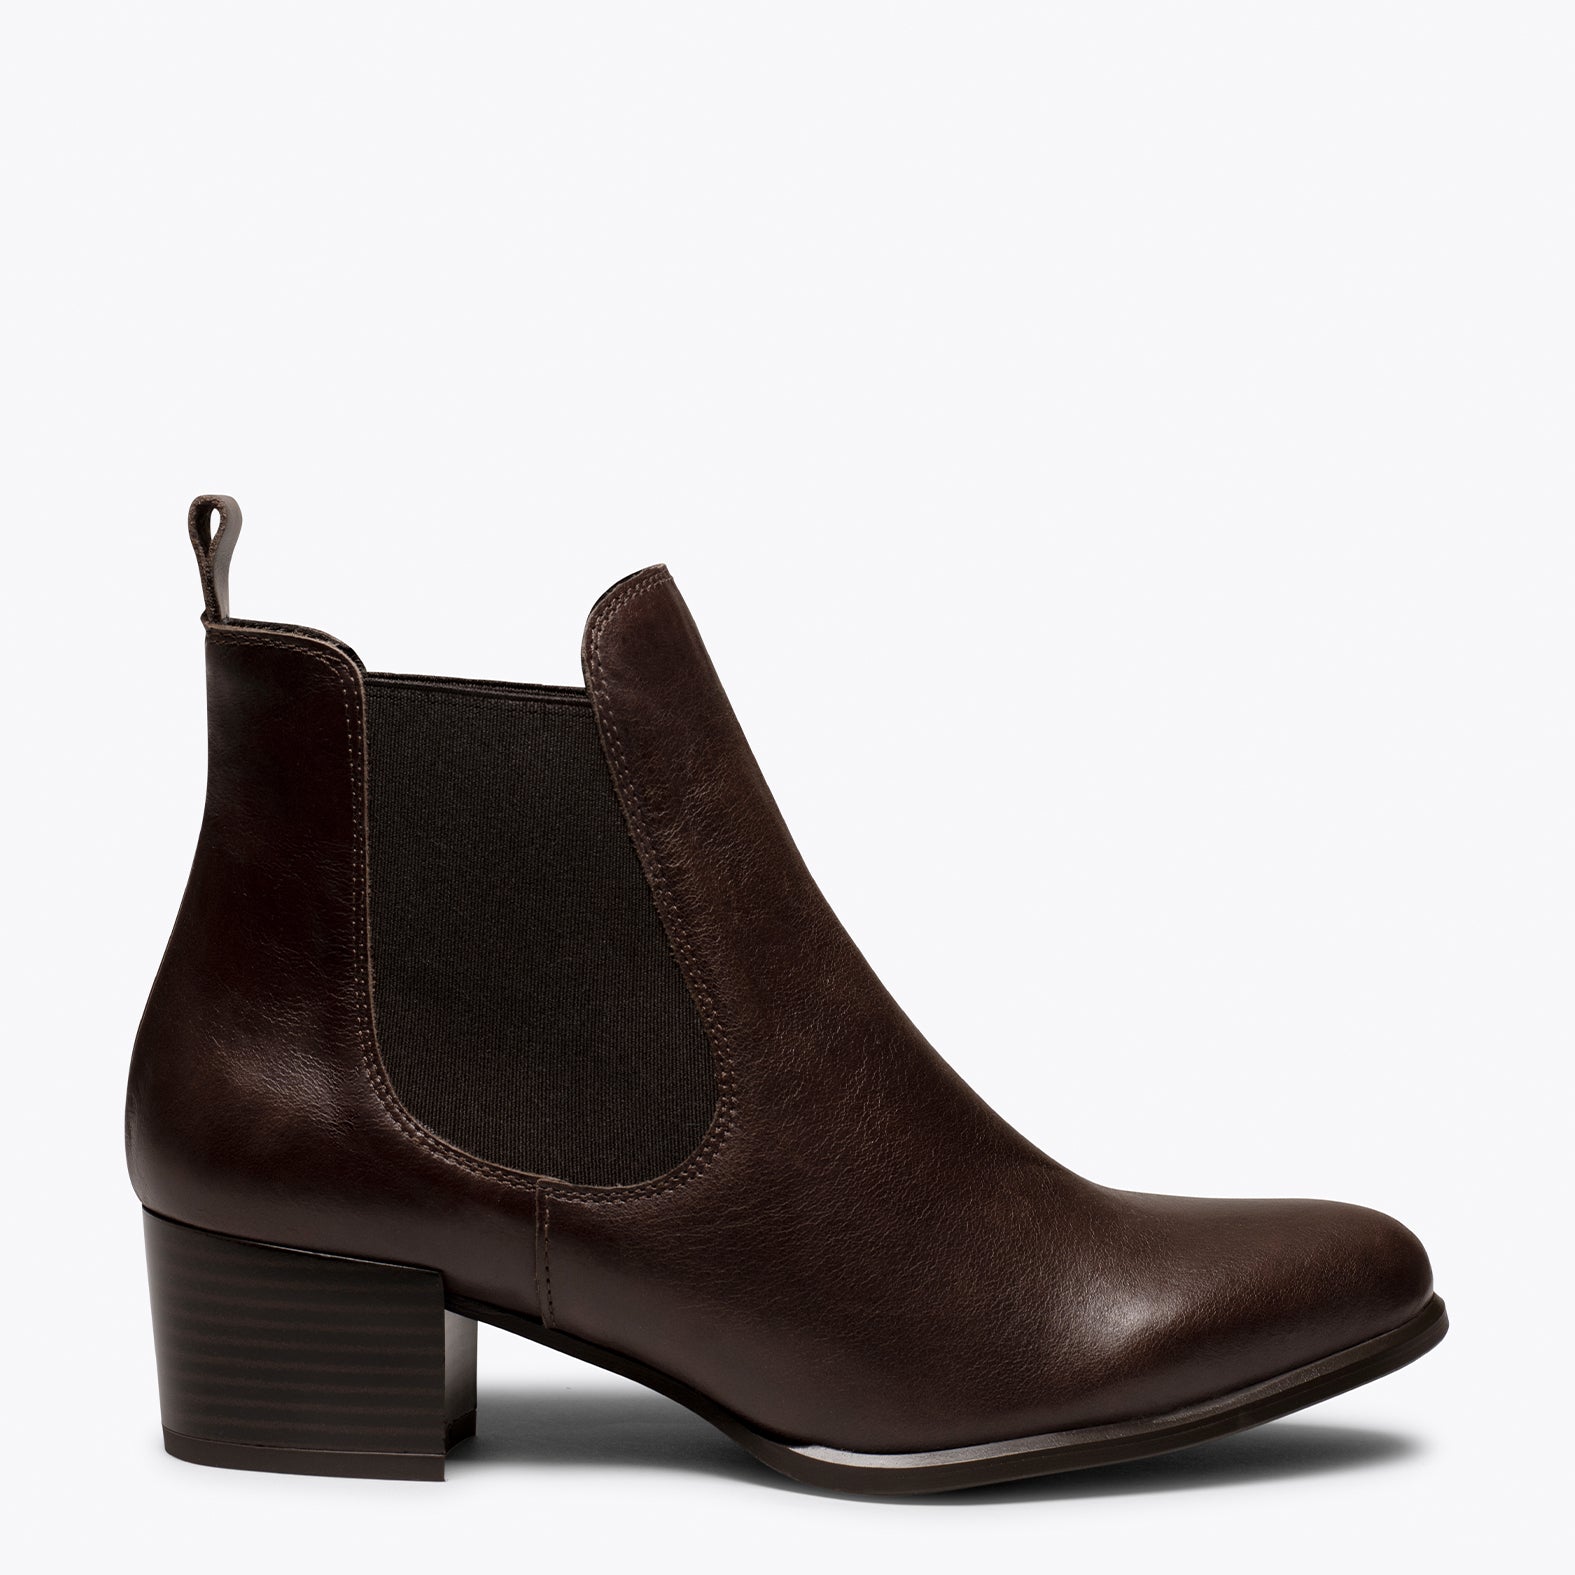 LONDON – BROWN leather chelsea bootie